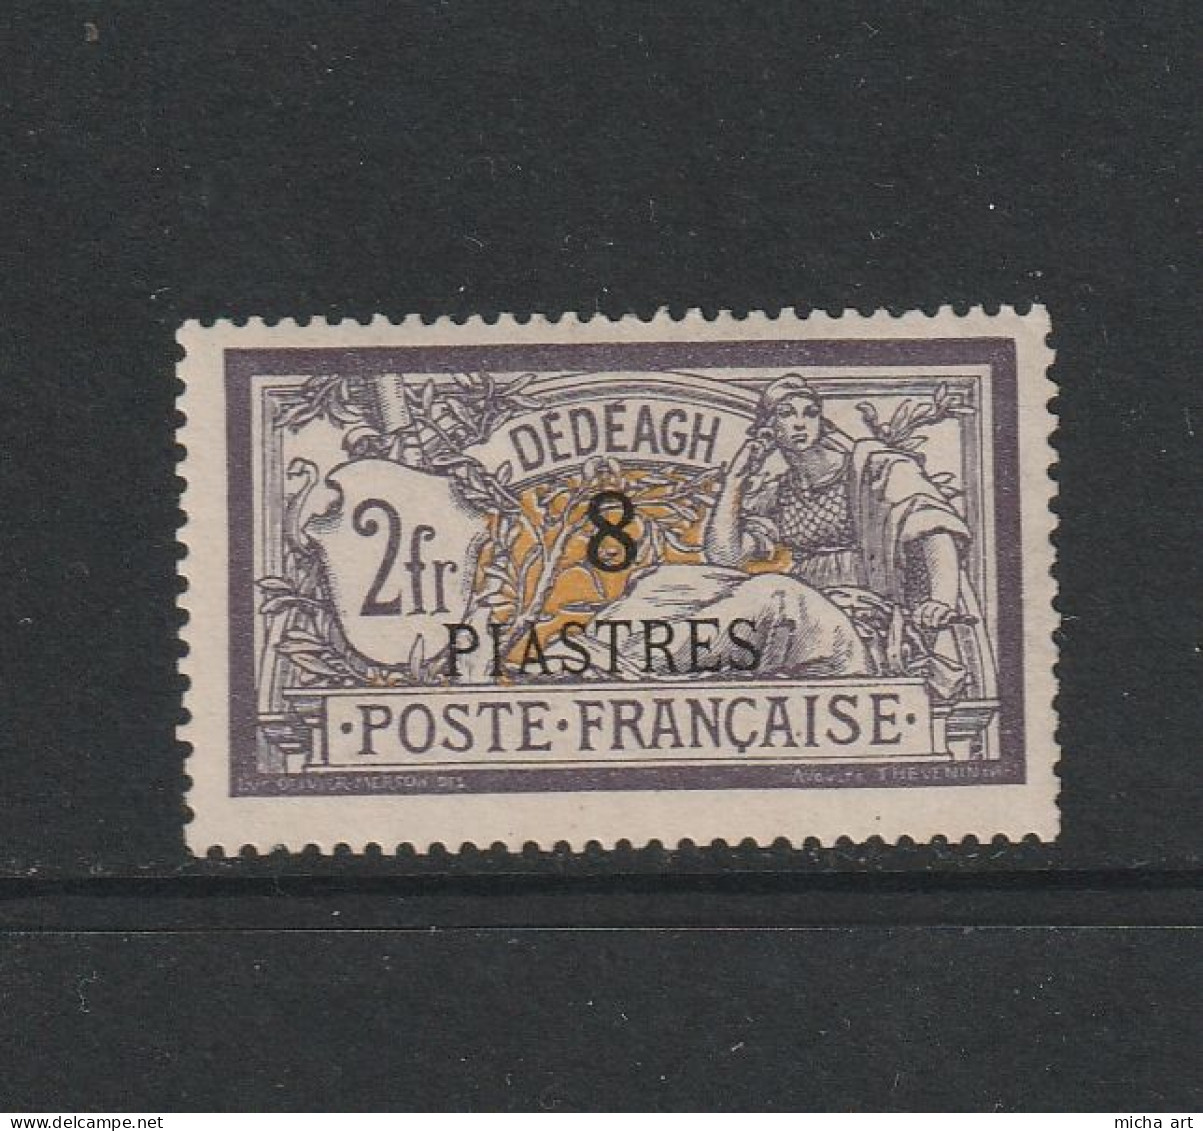 Greece French Post Office 1902 - 1913 Dedeagh Issue 8 Pi / 2 F. MH W1101 - Nuovi